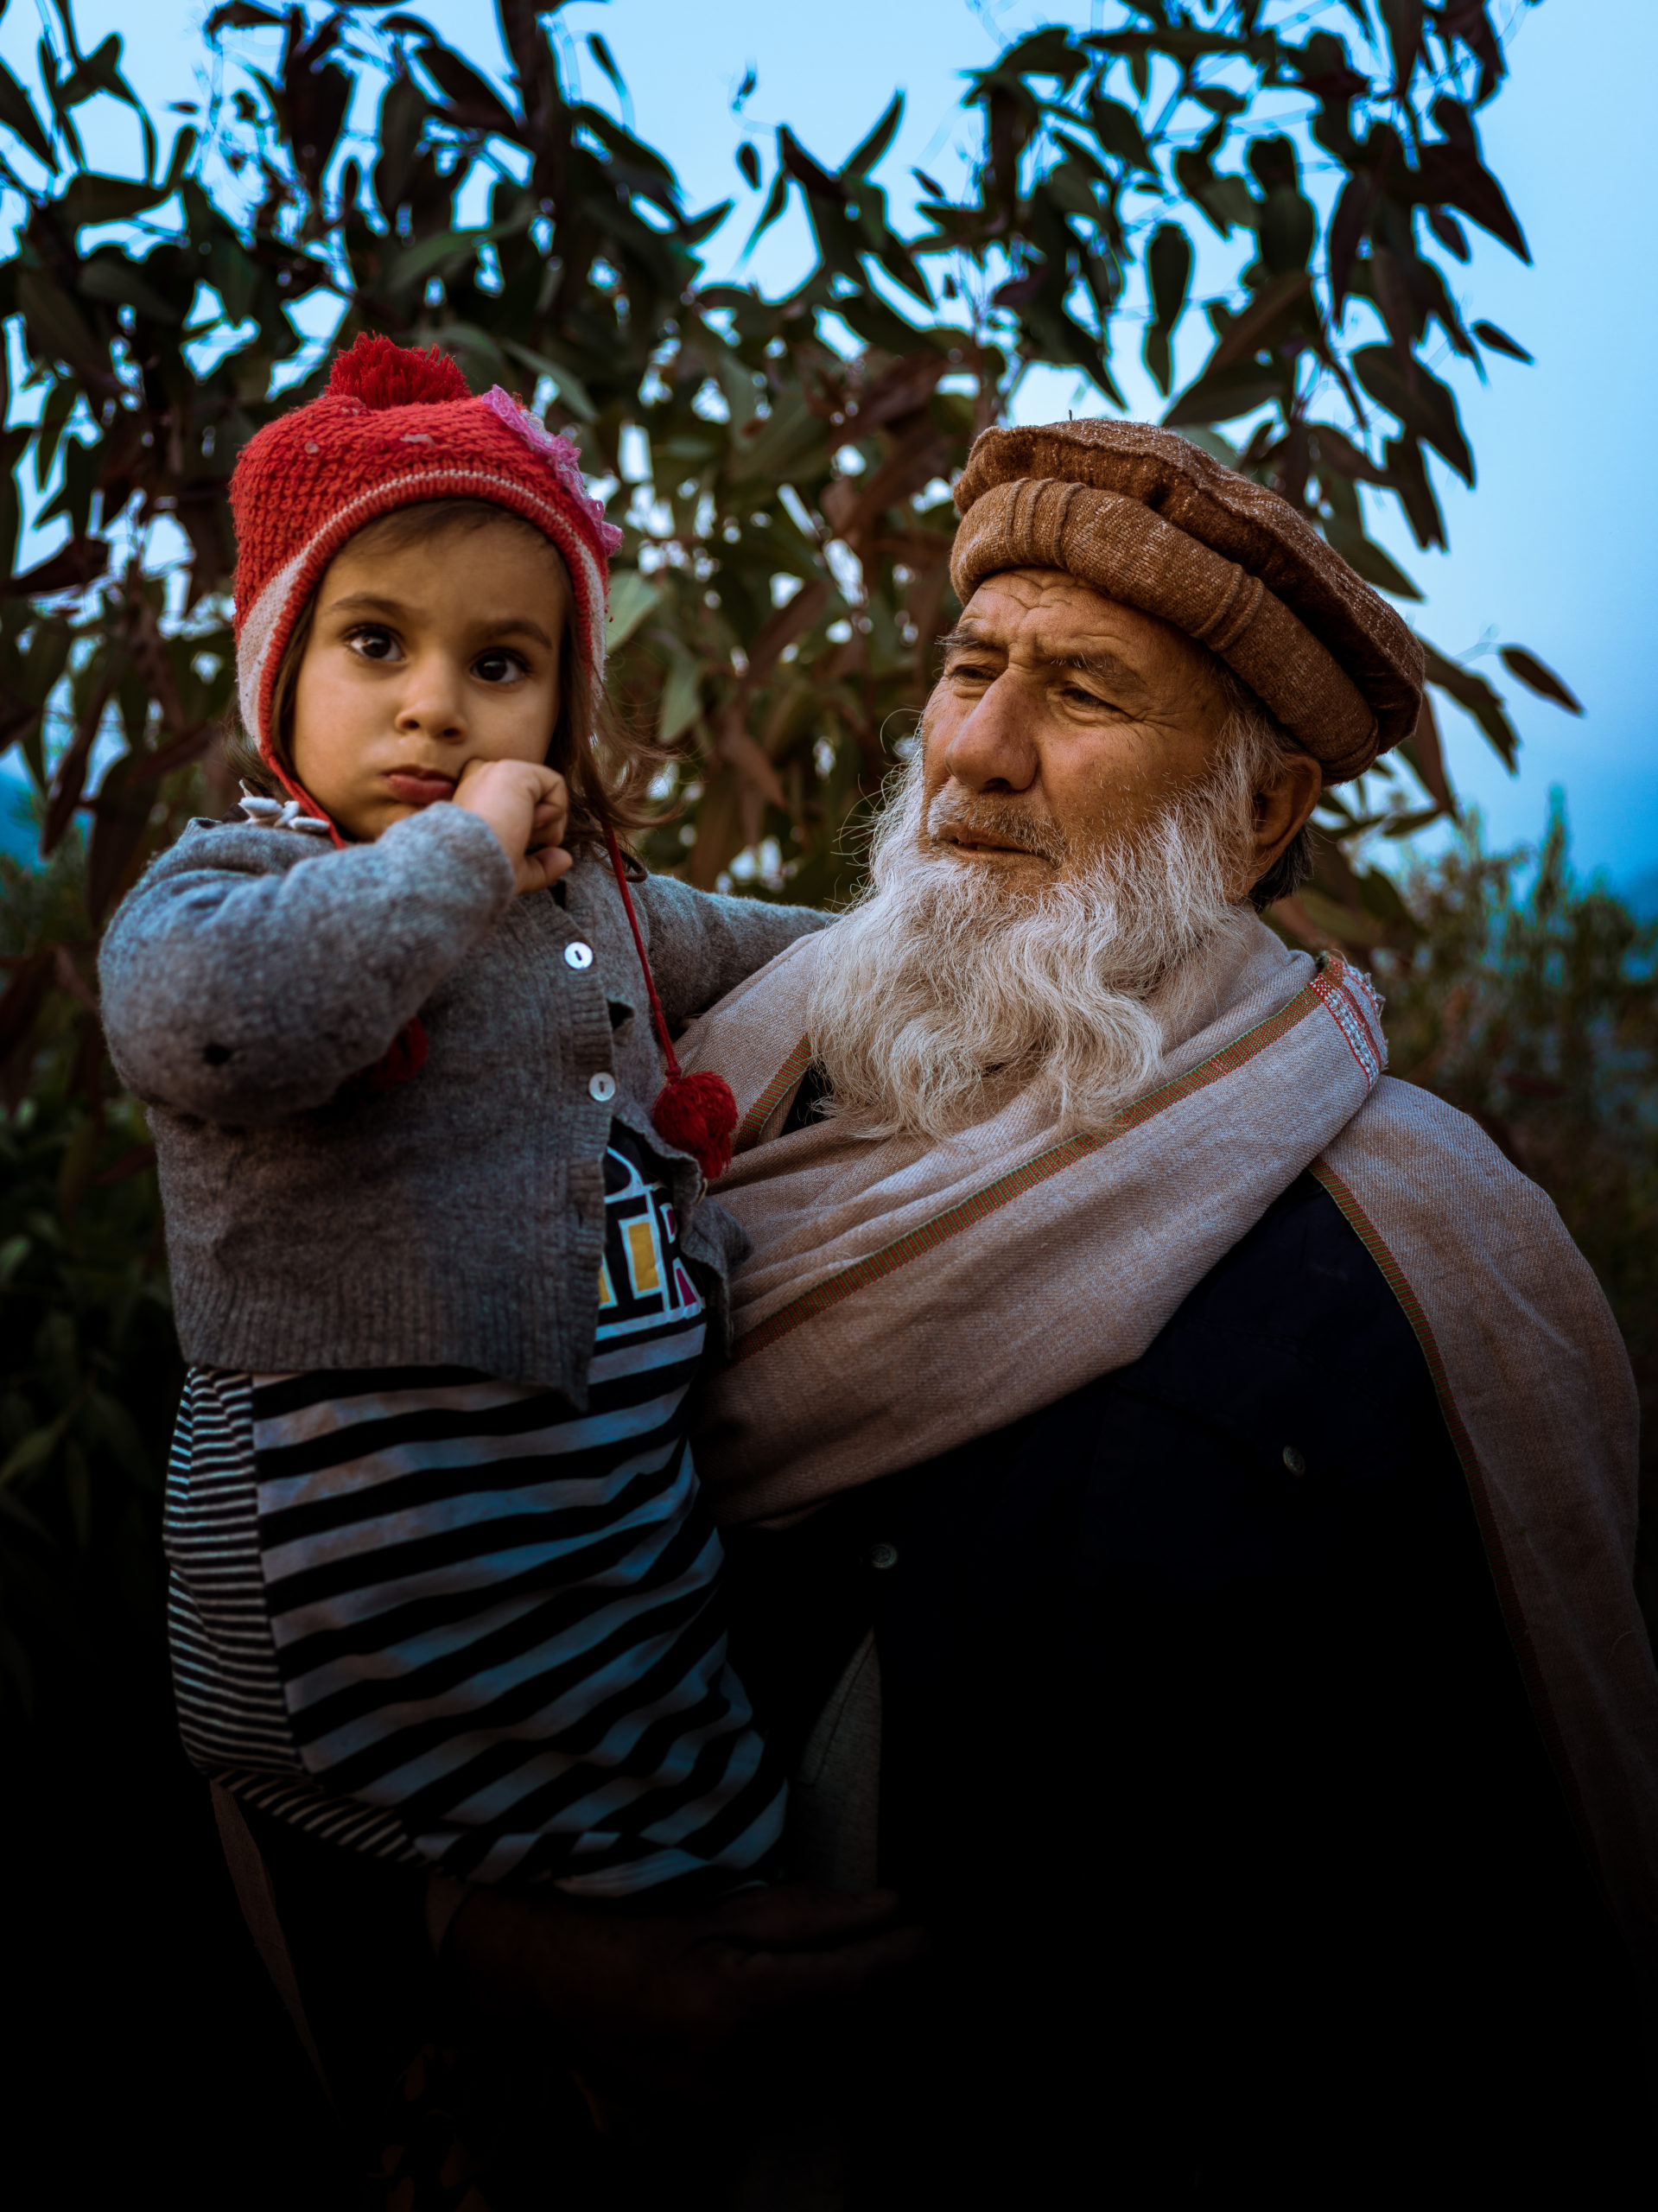 A Pathan grandfather with his grandchild